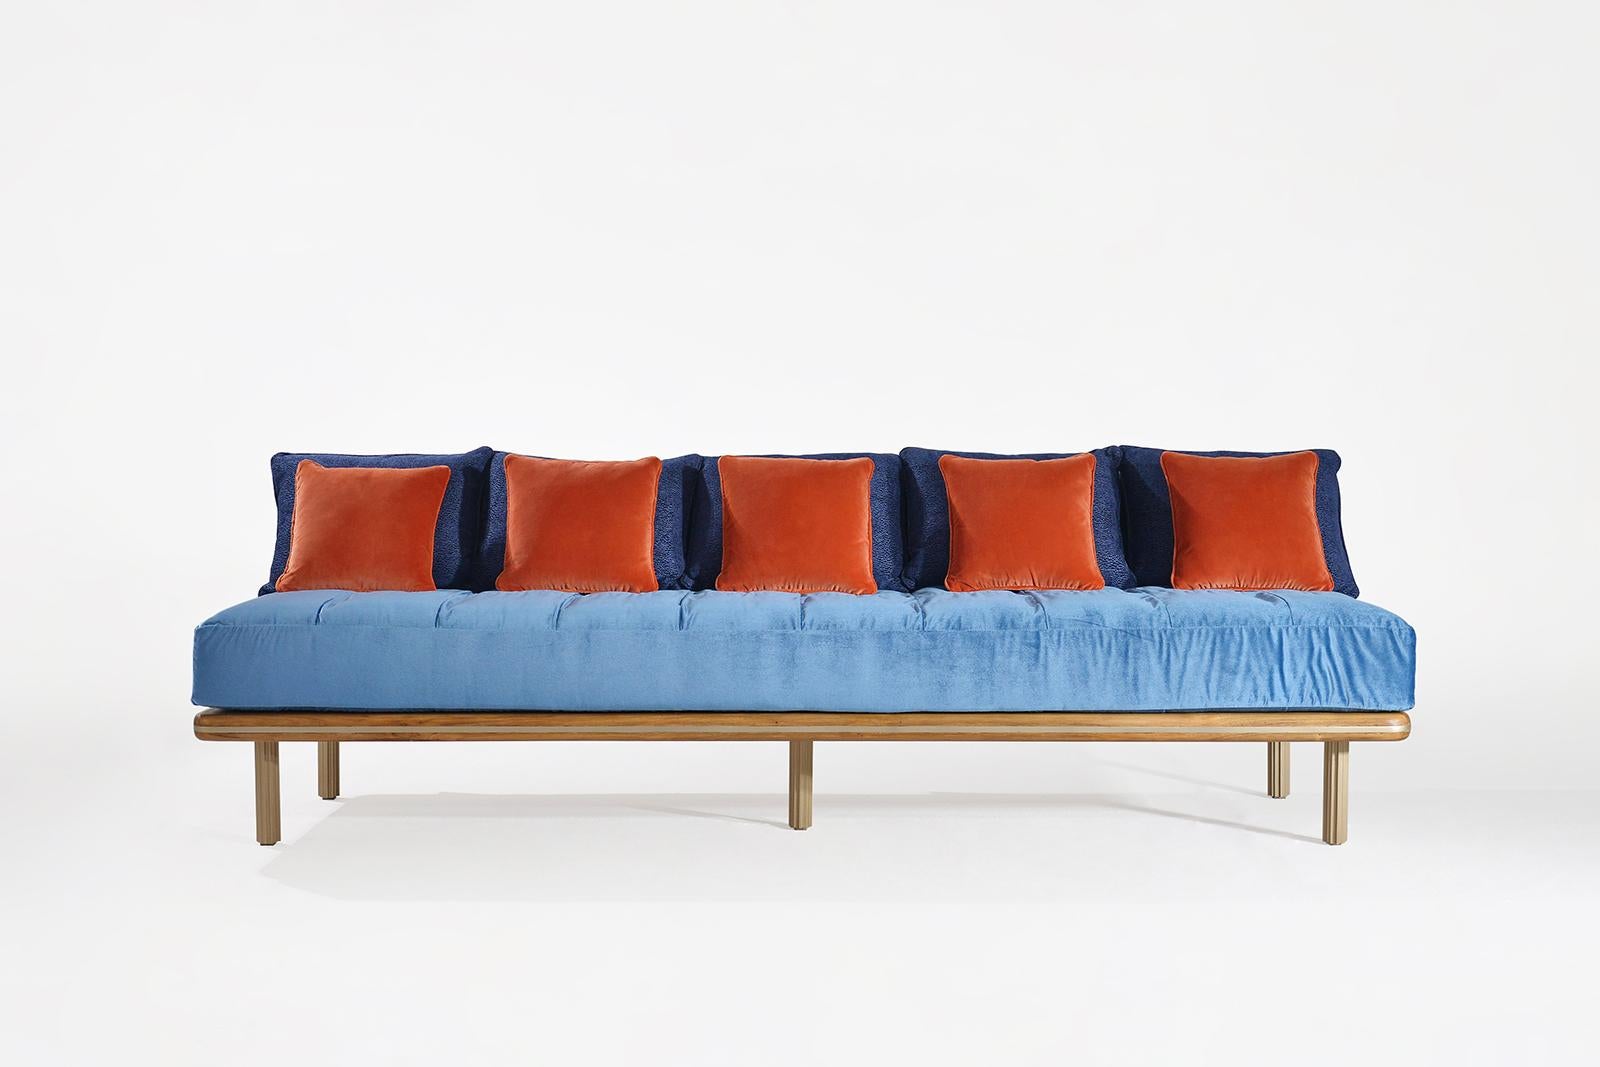 Discover our bespoke sofa, artfully designed to pair seamlessly with a bespoke dining table. Whether hosting friends or enjoying a cozy family meal, this unique piece is tailored to perfection. In response to the client's vision, we've added a touch